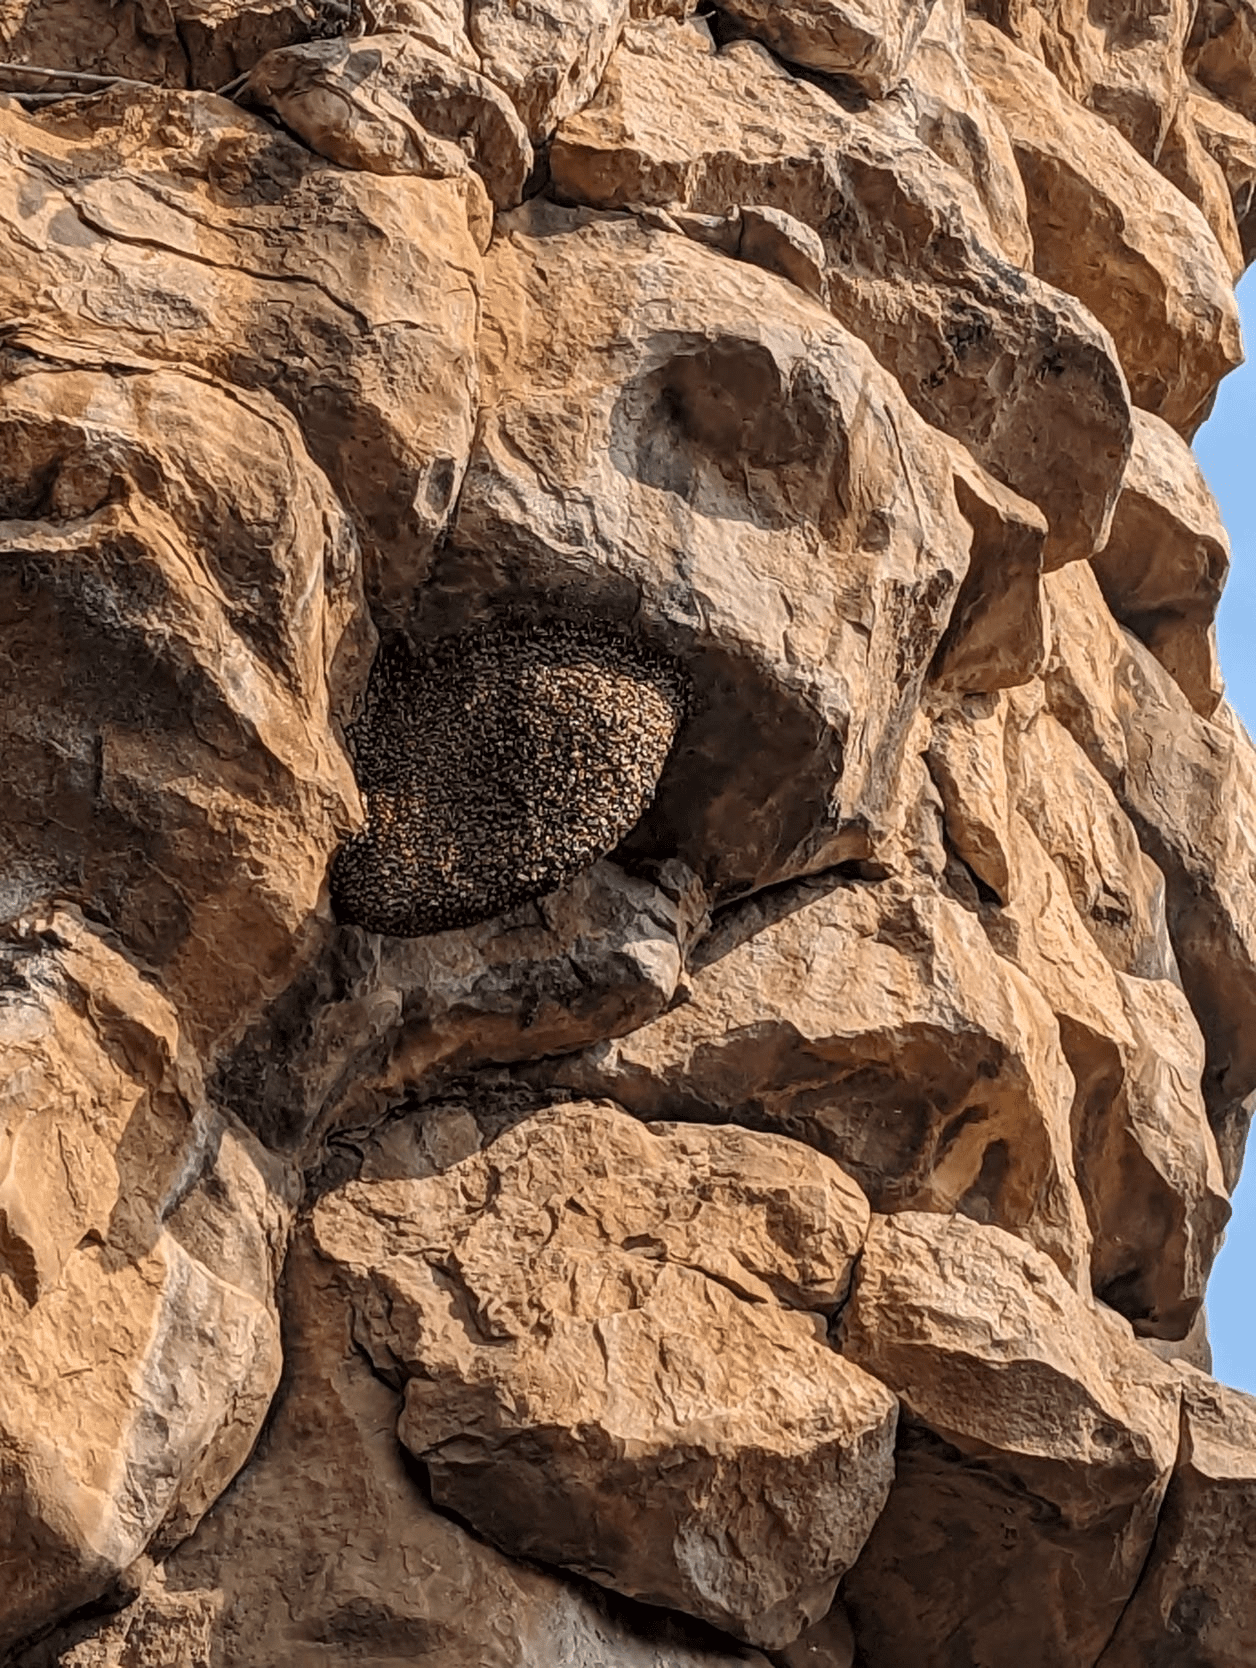 Hives like this from the giant honey bees (Apis dorsata) dot the cliffs around the site.